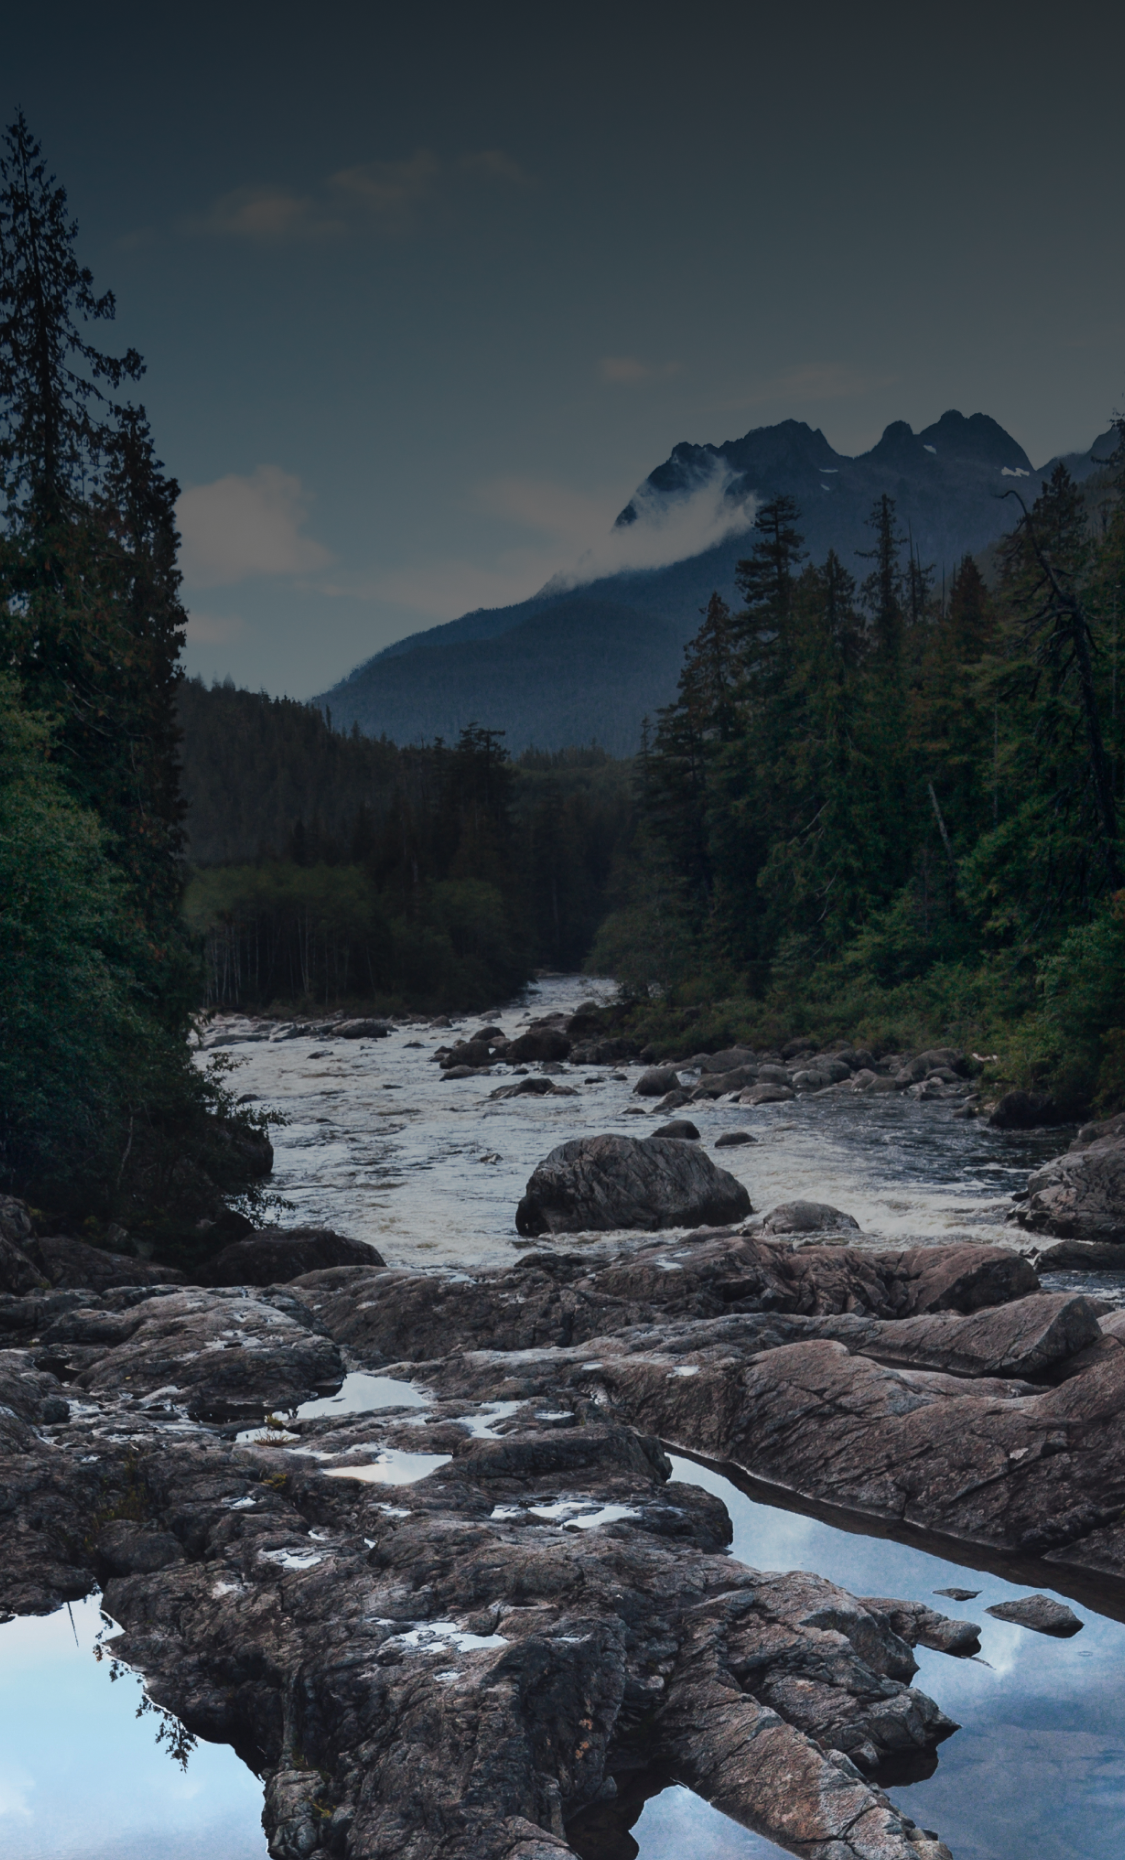 A tranquil image of a river winding through a coniferous forest with cloud shrouded mountains in the distance. 